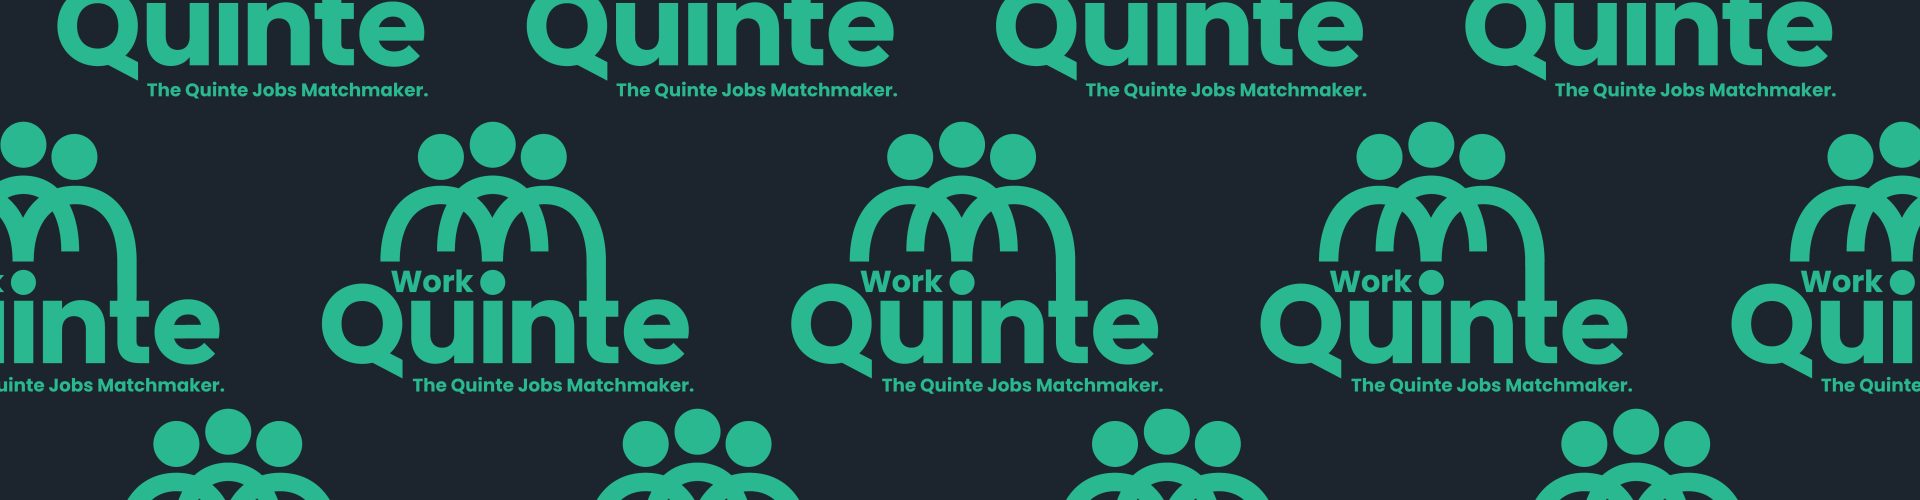 Black background with Teal Work in Quinte logo and The Quinte Jobs Matchmaker tagline.